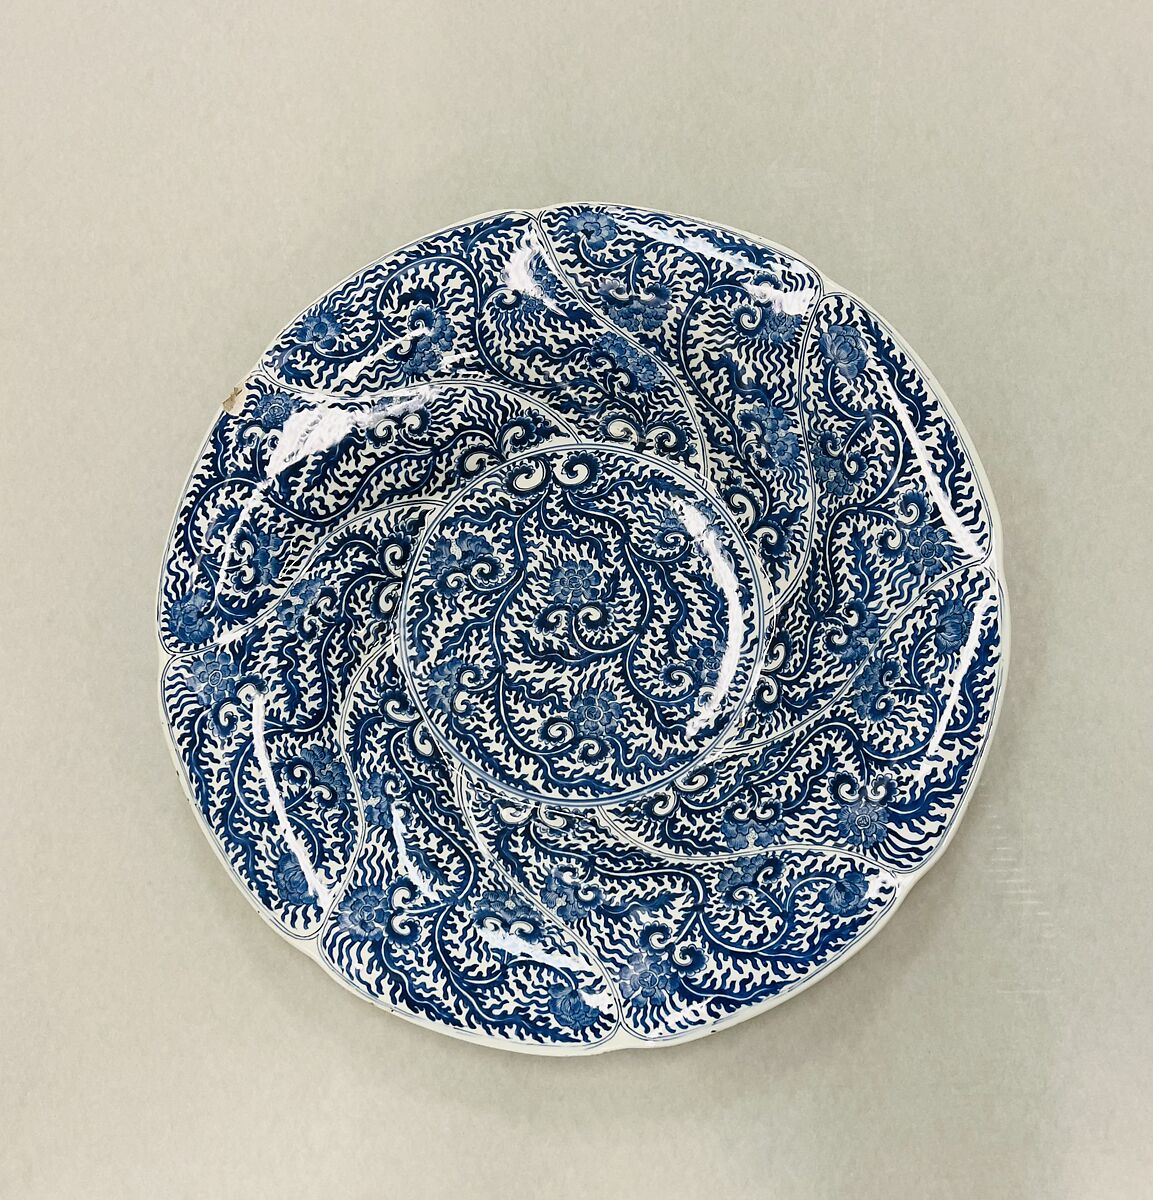 Plate with scalloped rim, Porcelain painted in underglaze cobalt blue (Jingdezhen ware), China 